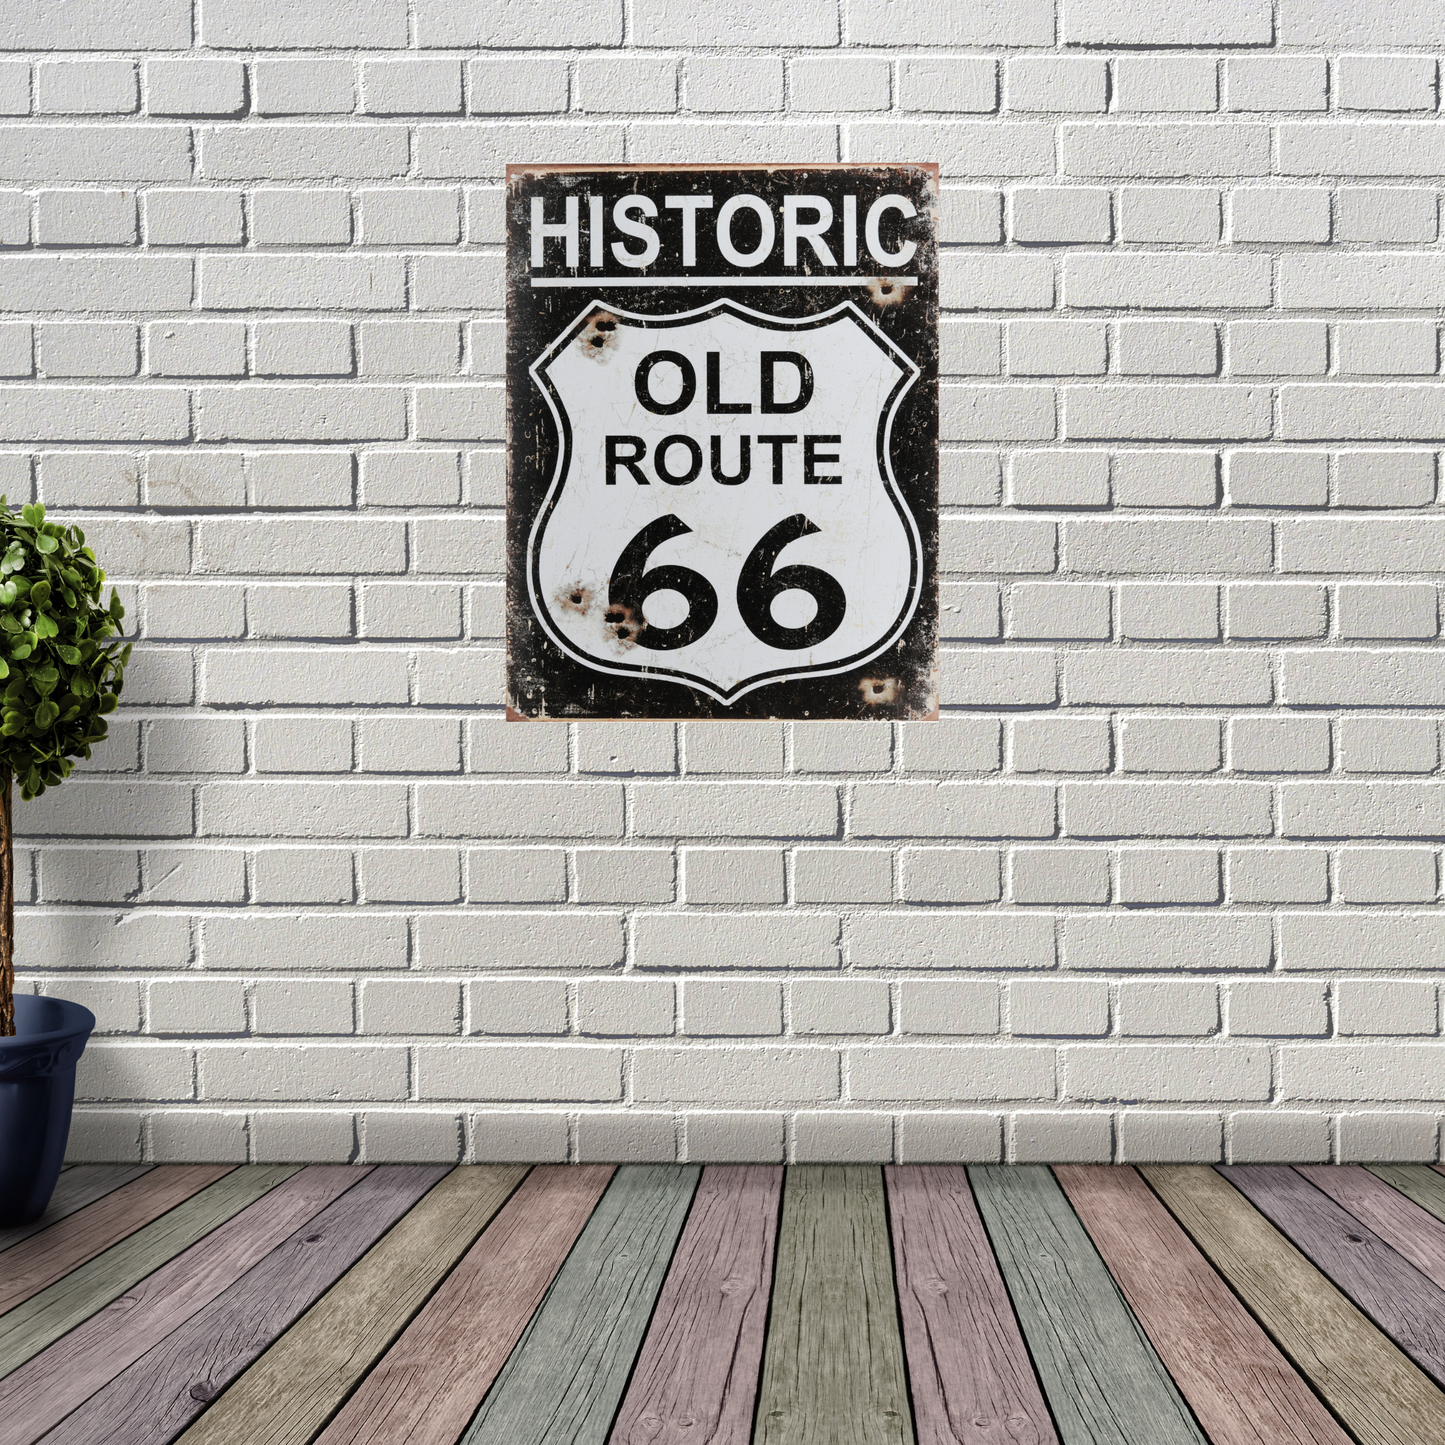 Vintage Poster that says "Historic Old Route 66" with rusty distressed look. On a wall for scale